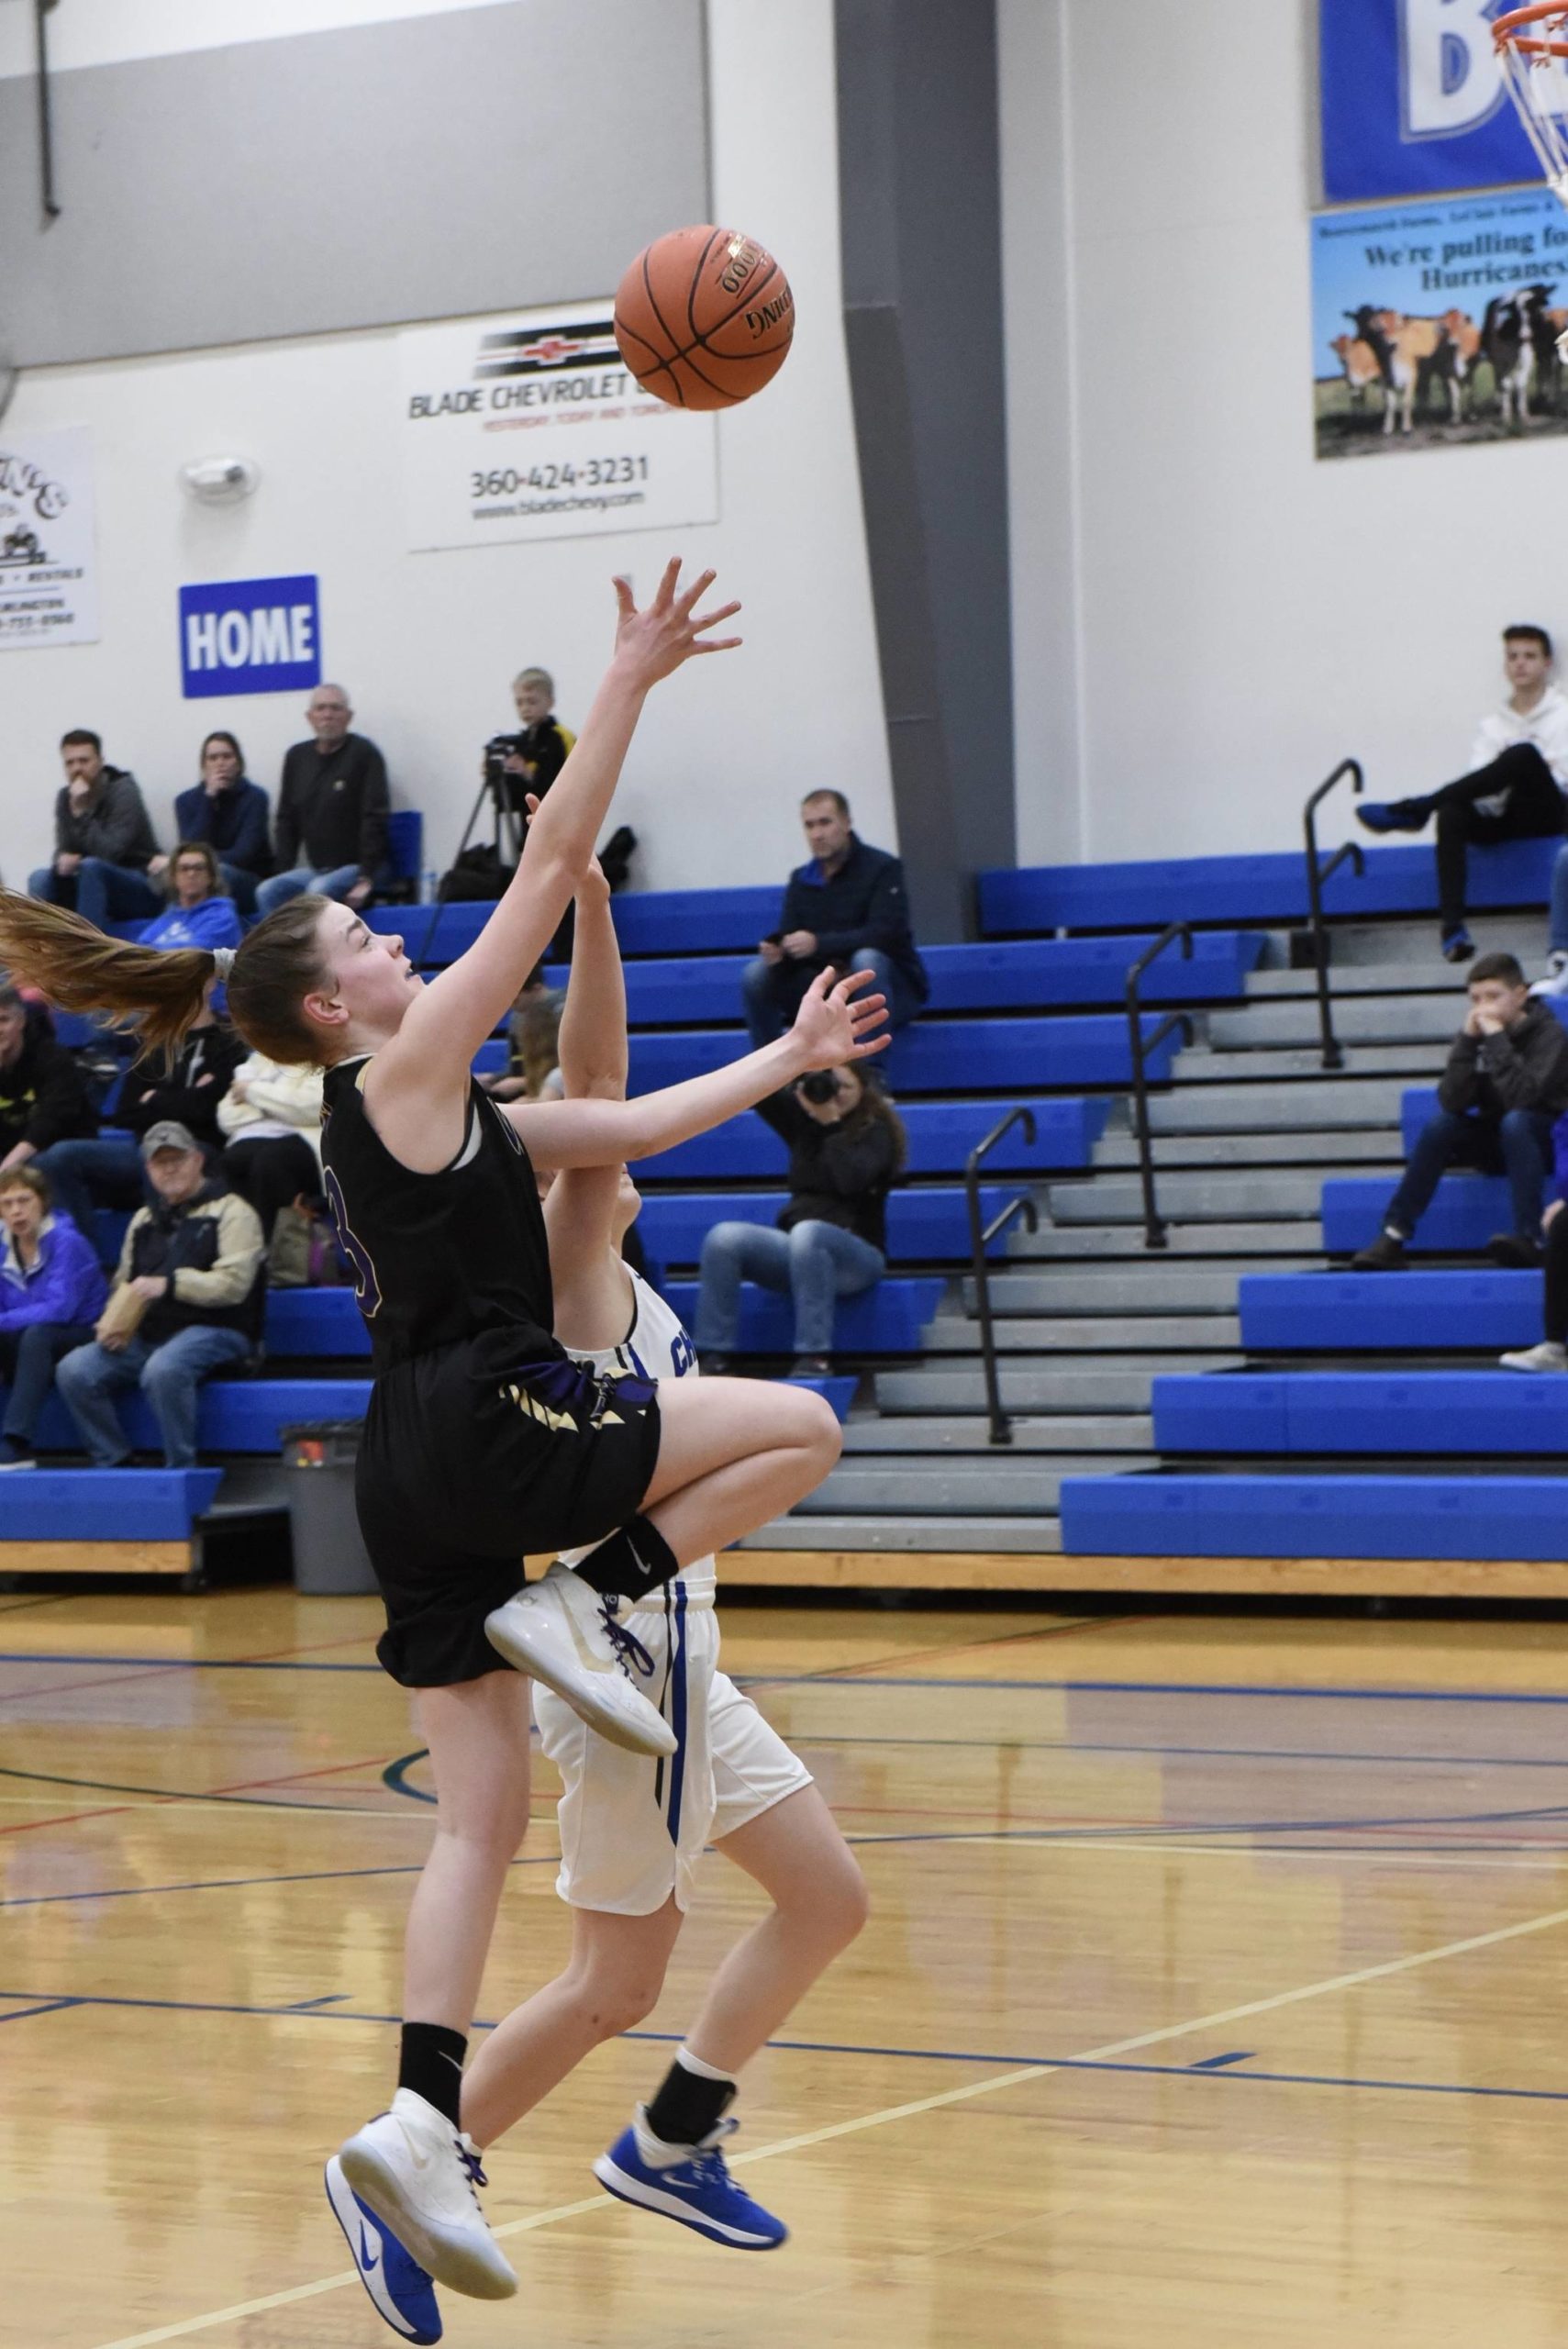 Rachel Starr races to the basket on a fast break for two points. (John Stimpson/contributed photo.)